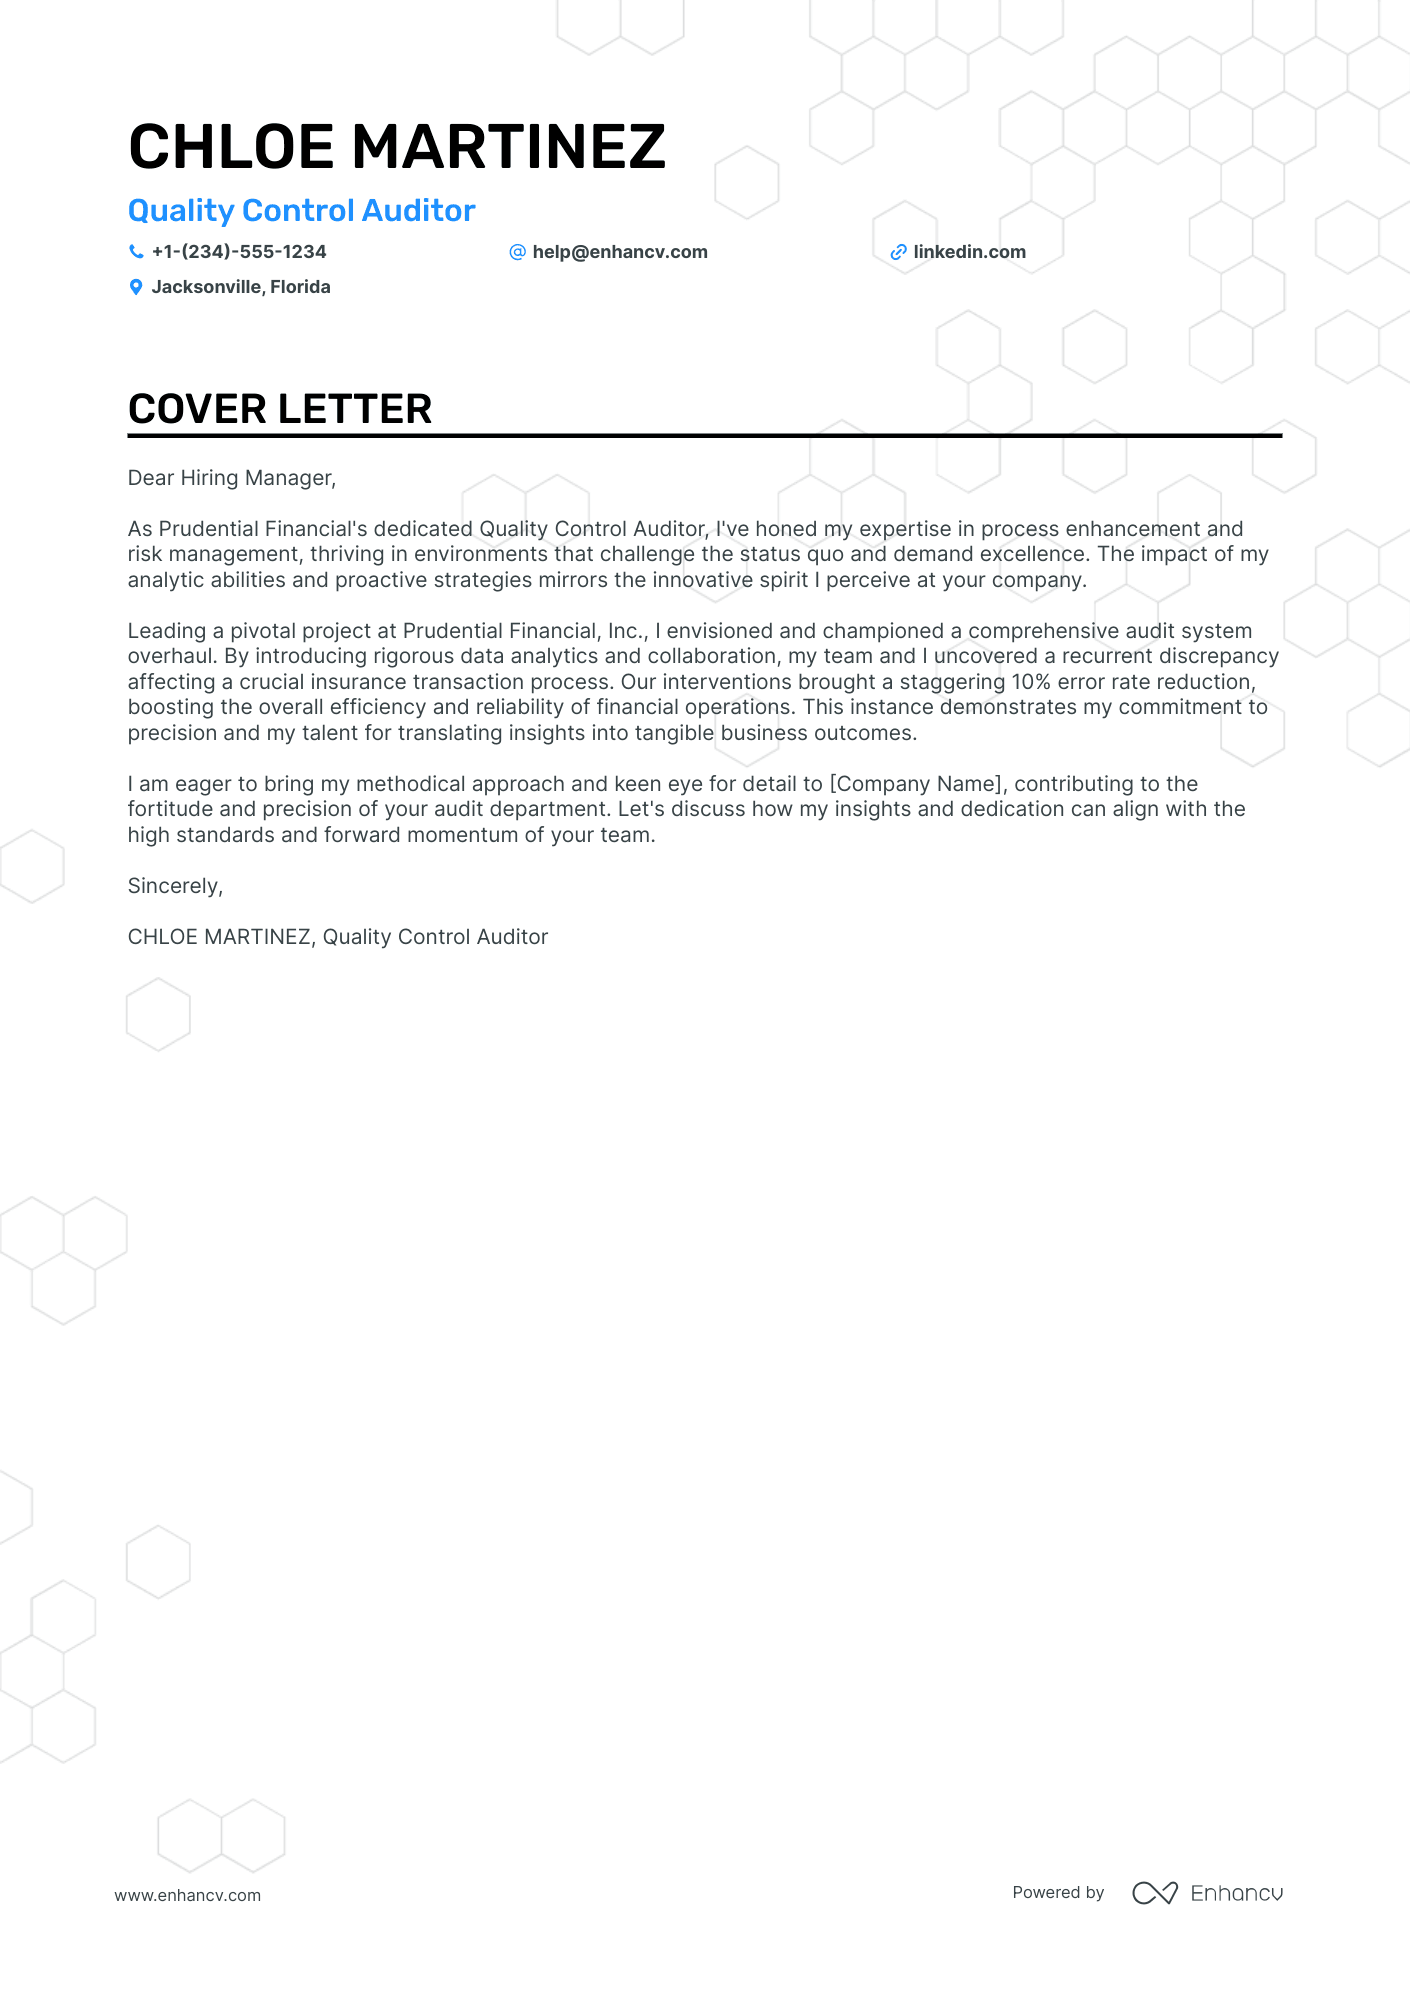 Quality Control Specialist cover letter